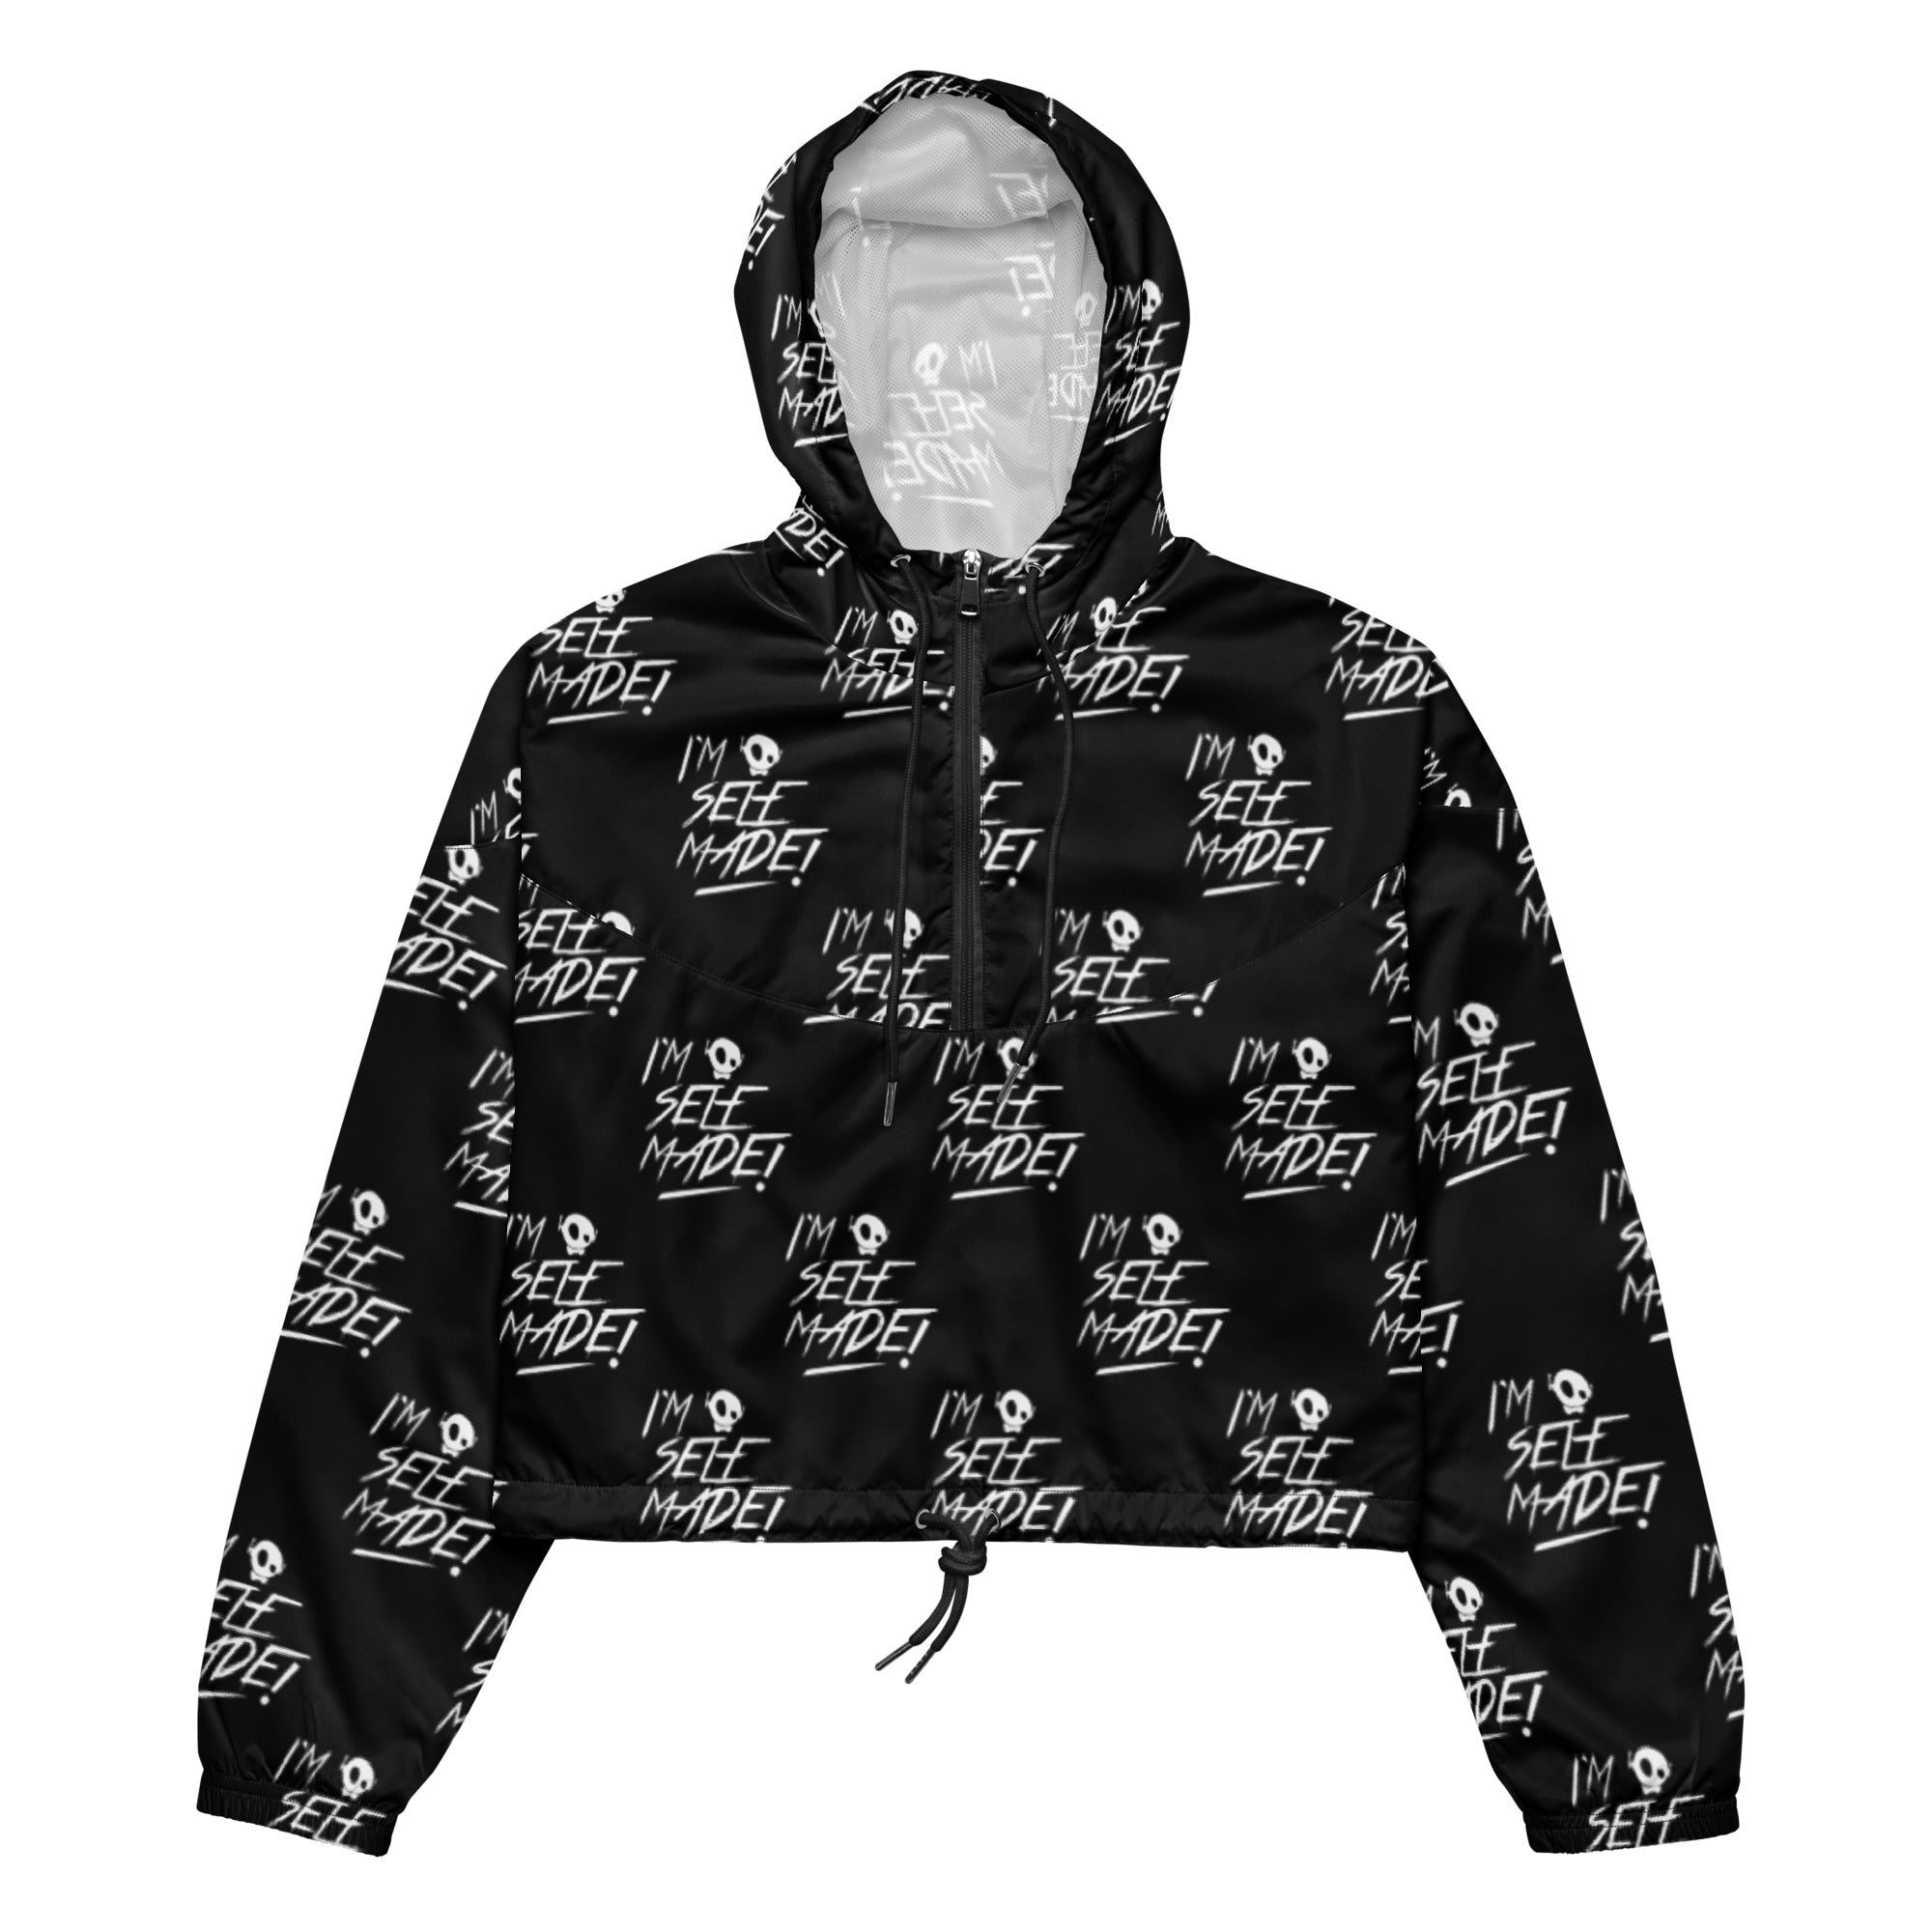 "SELF MADE!" ALL-OVER BLK WOMEN'S CROPPED WINDBREAKER